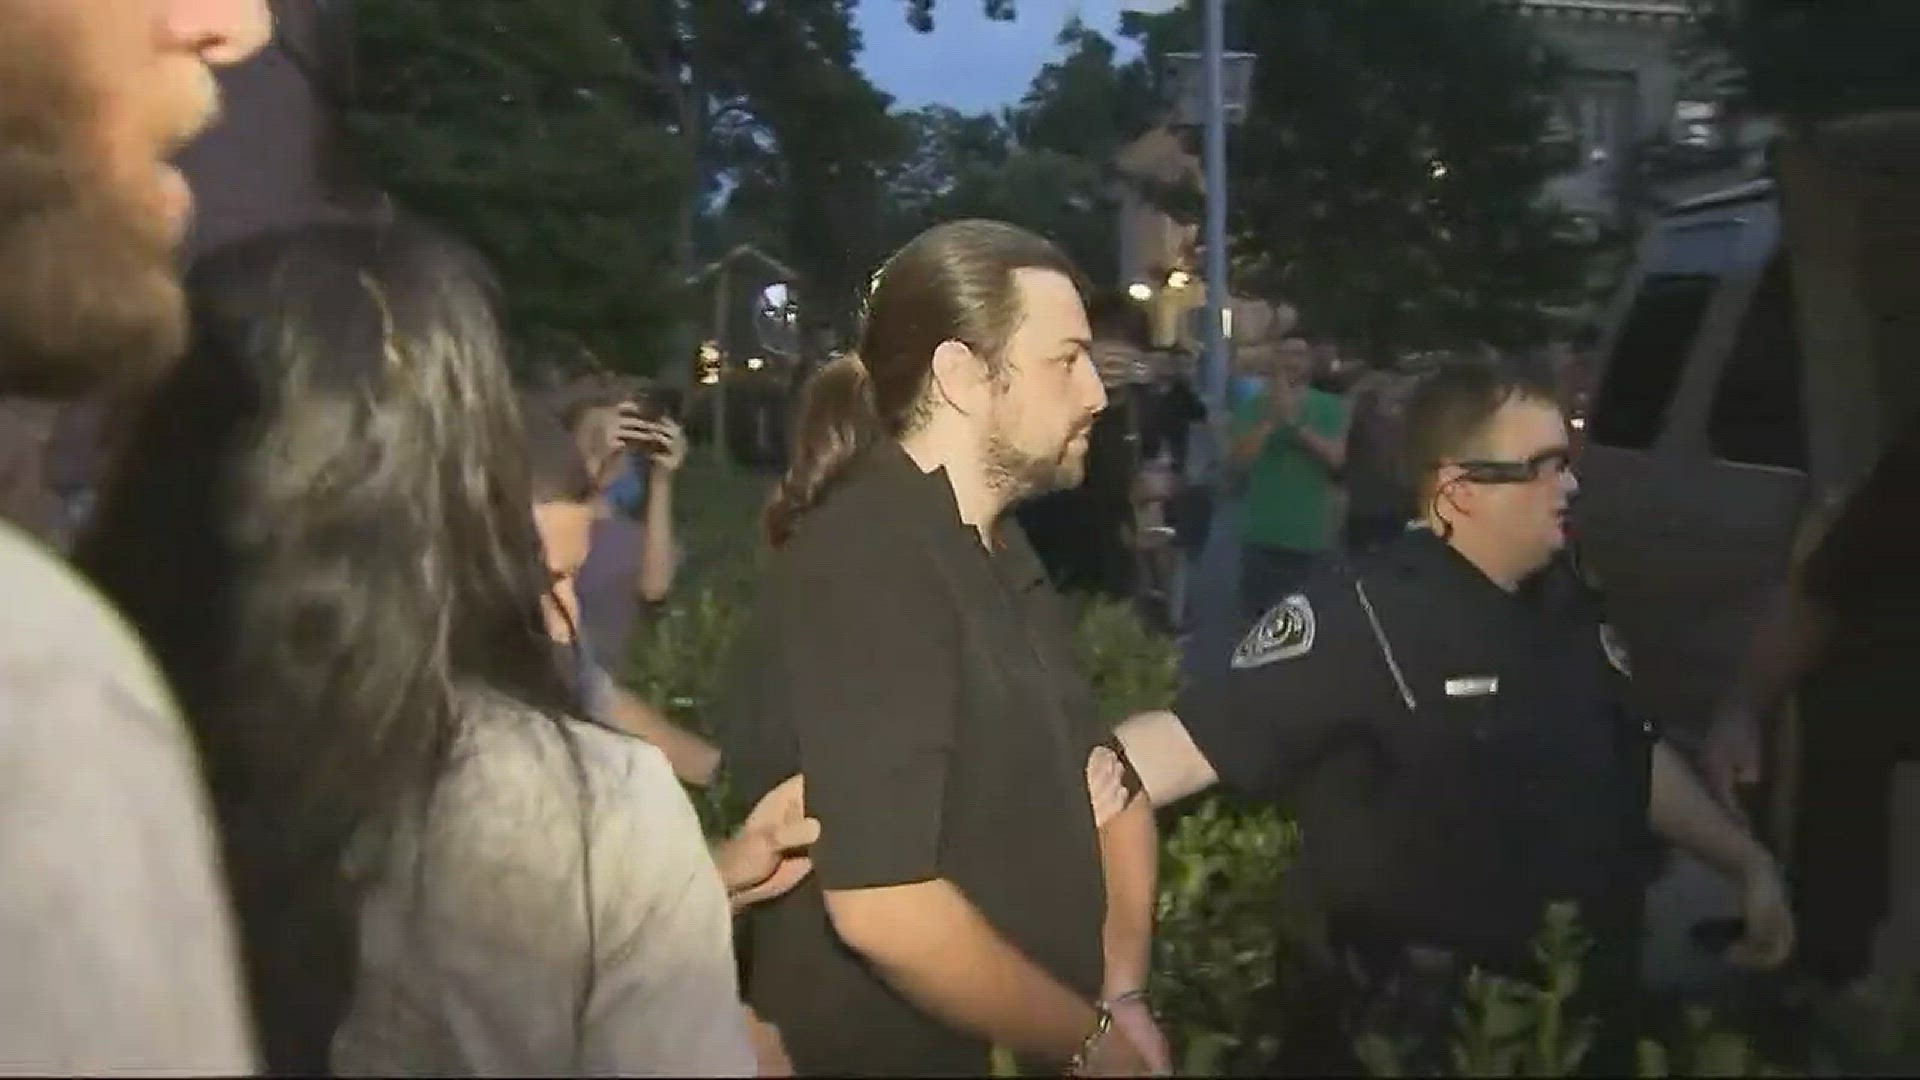 Tempers flaired and there were brief clashes with police as hundreds rally demanding the removal of a confederate statue.